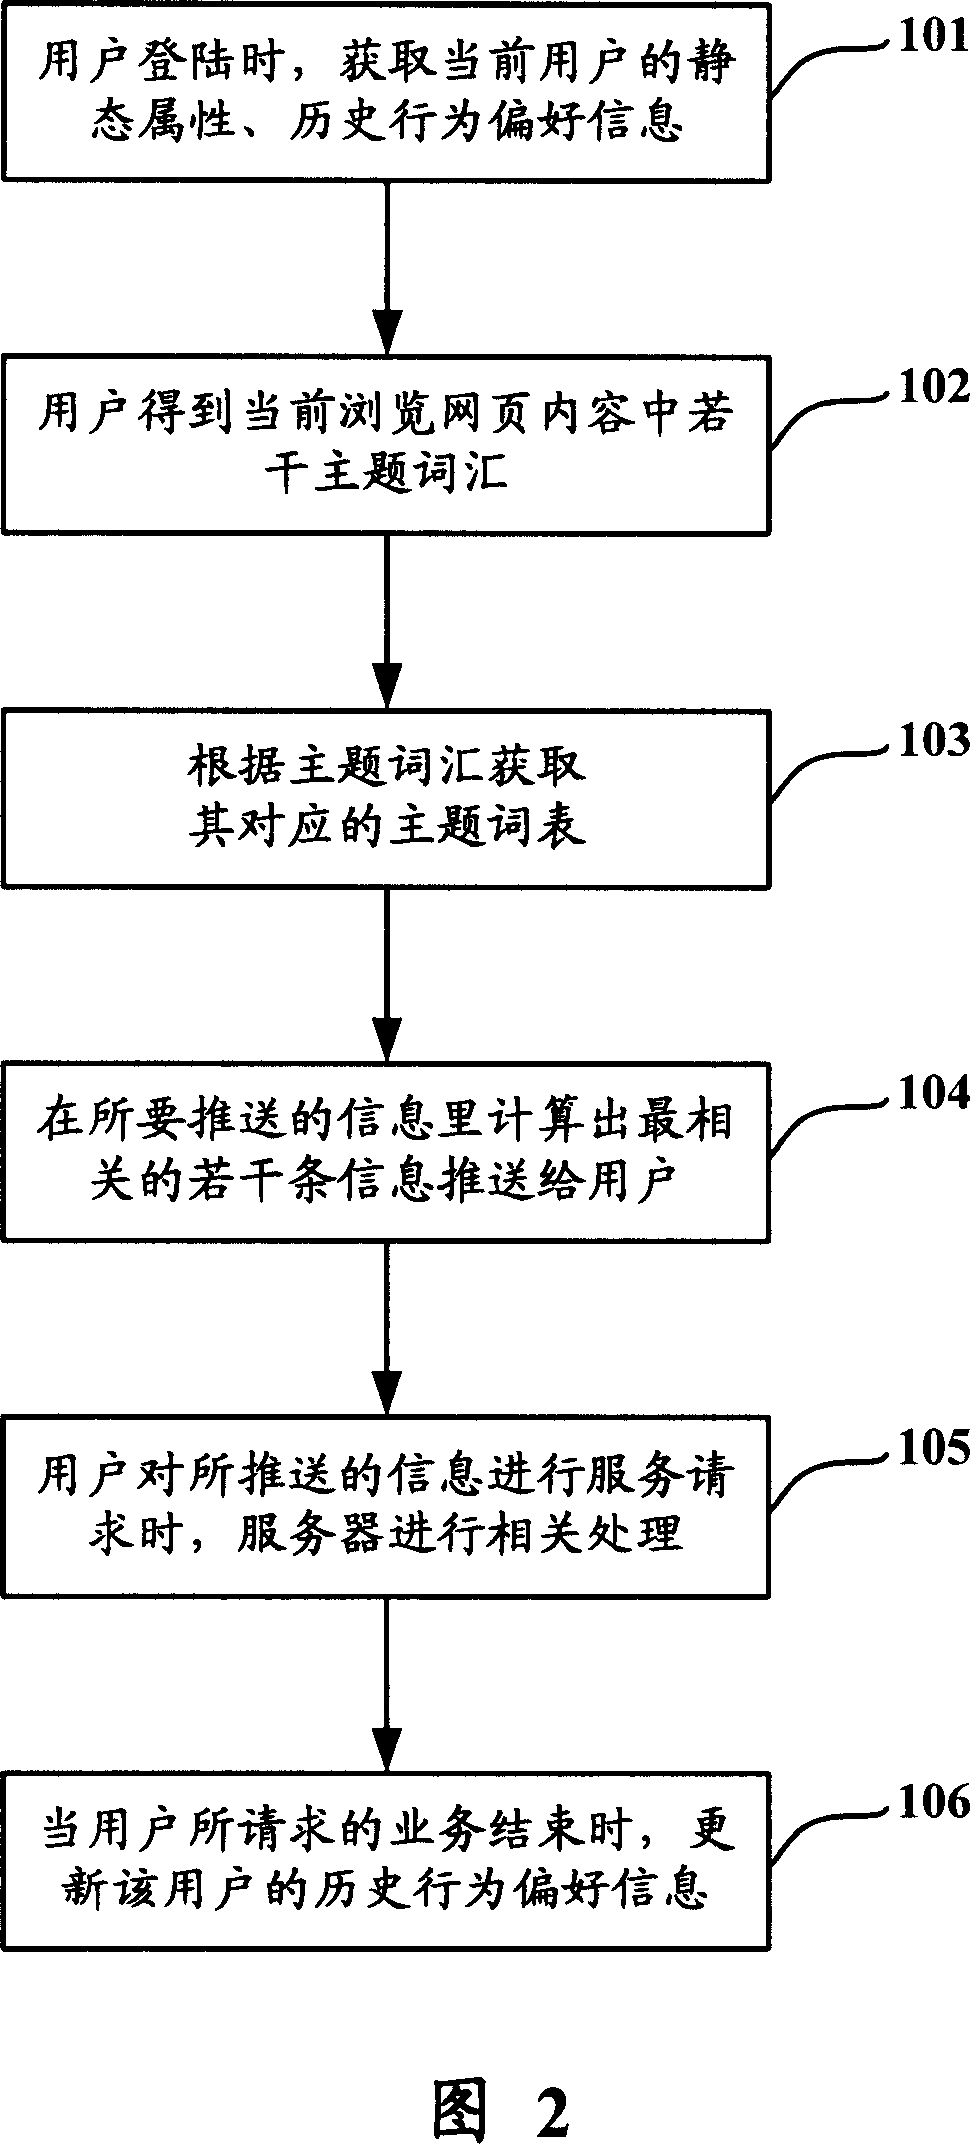 Personalized information push system and method